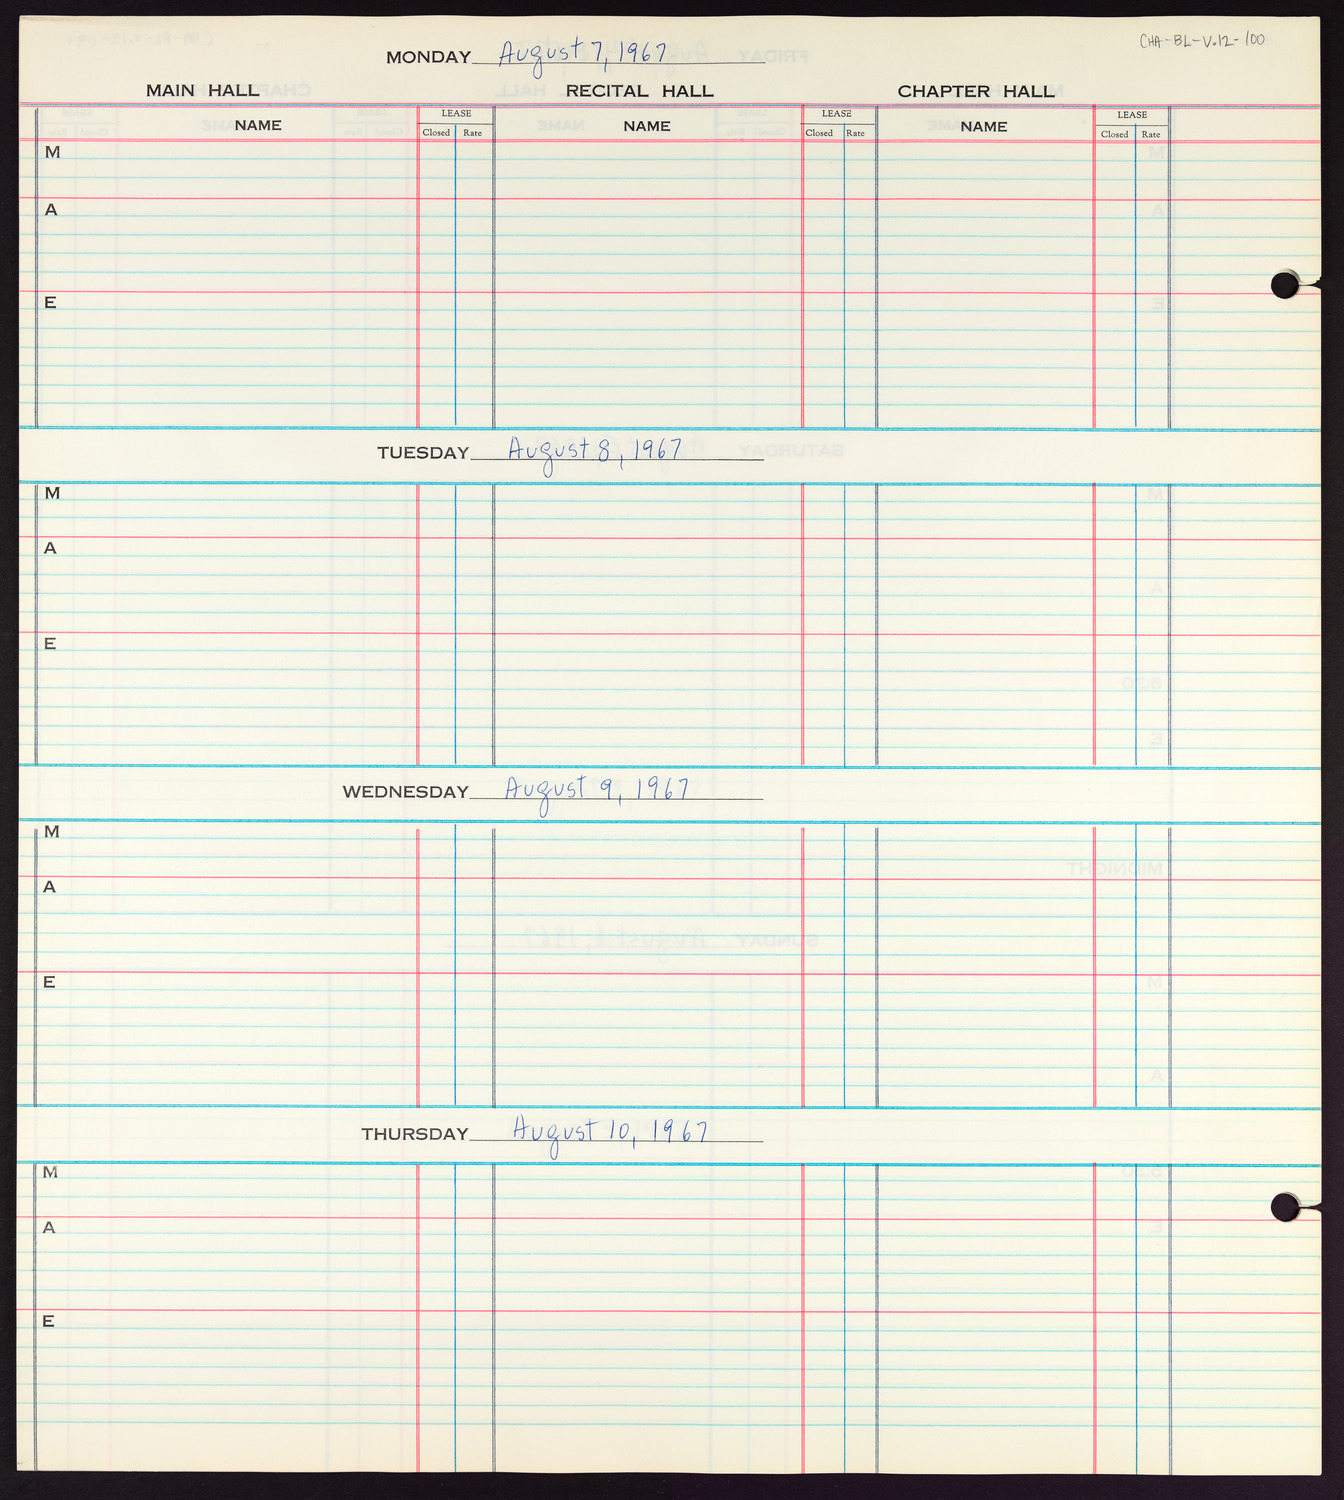 Carnegie Hall Booking Ledger, volume 12, page 100